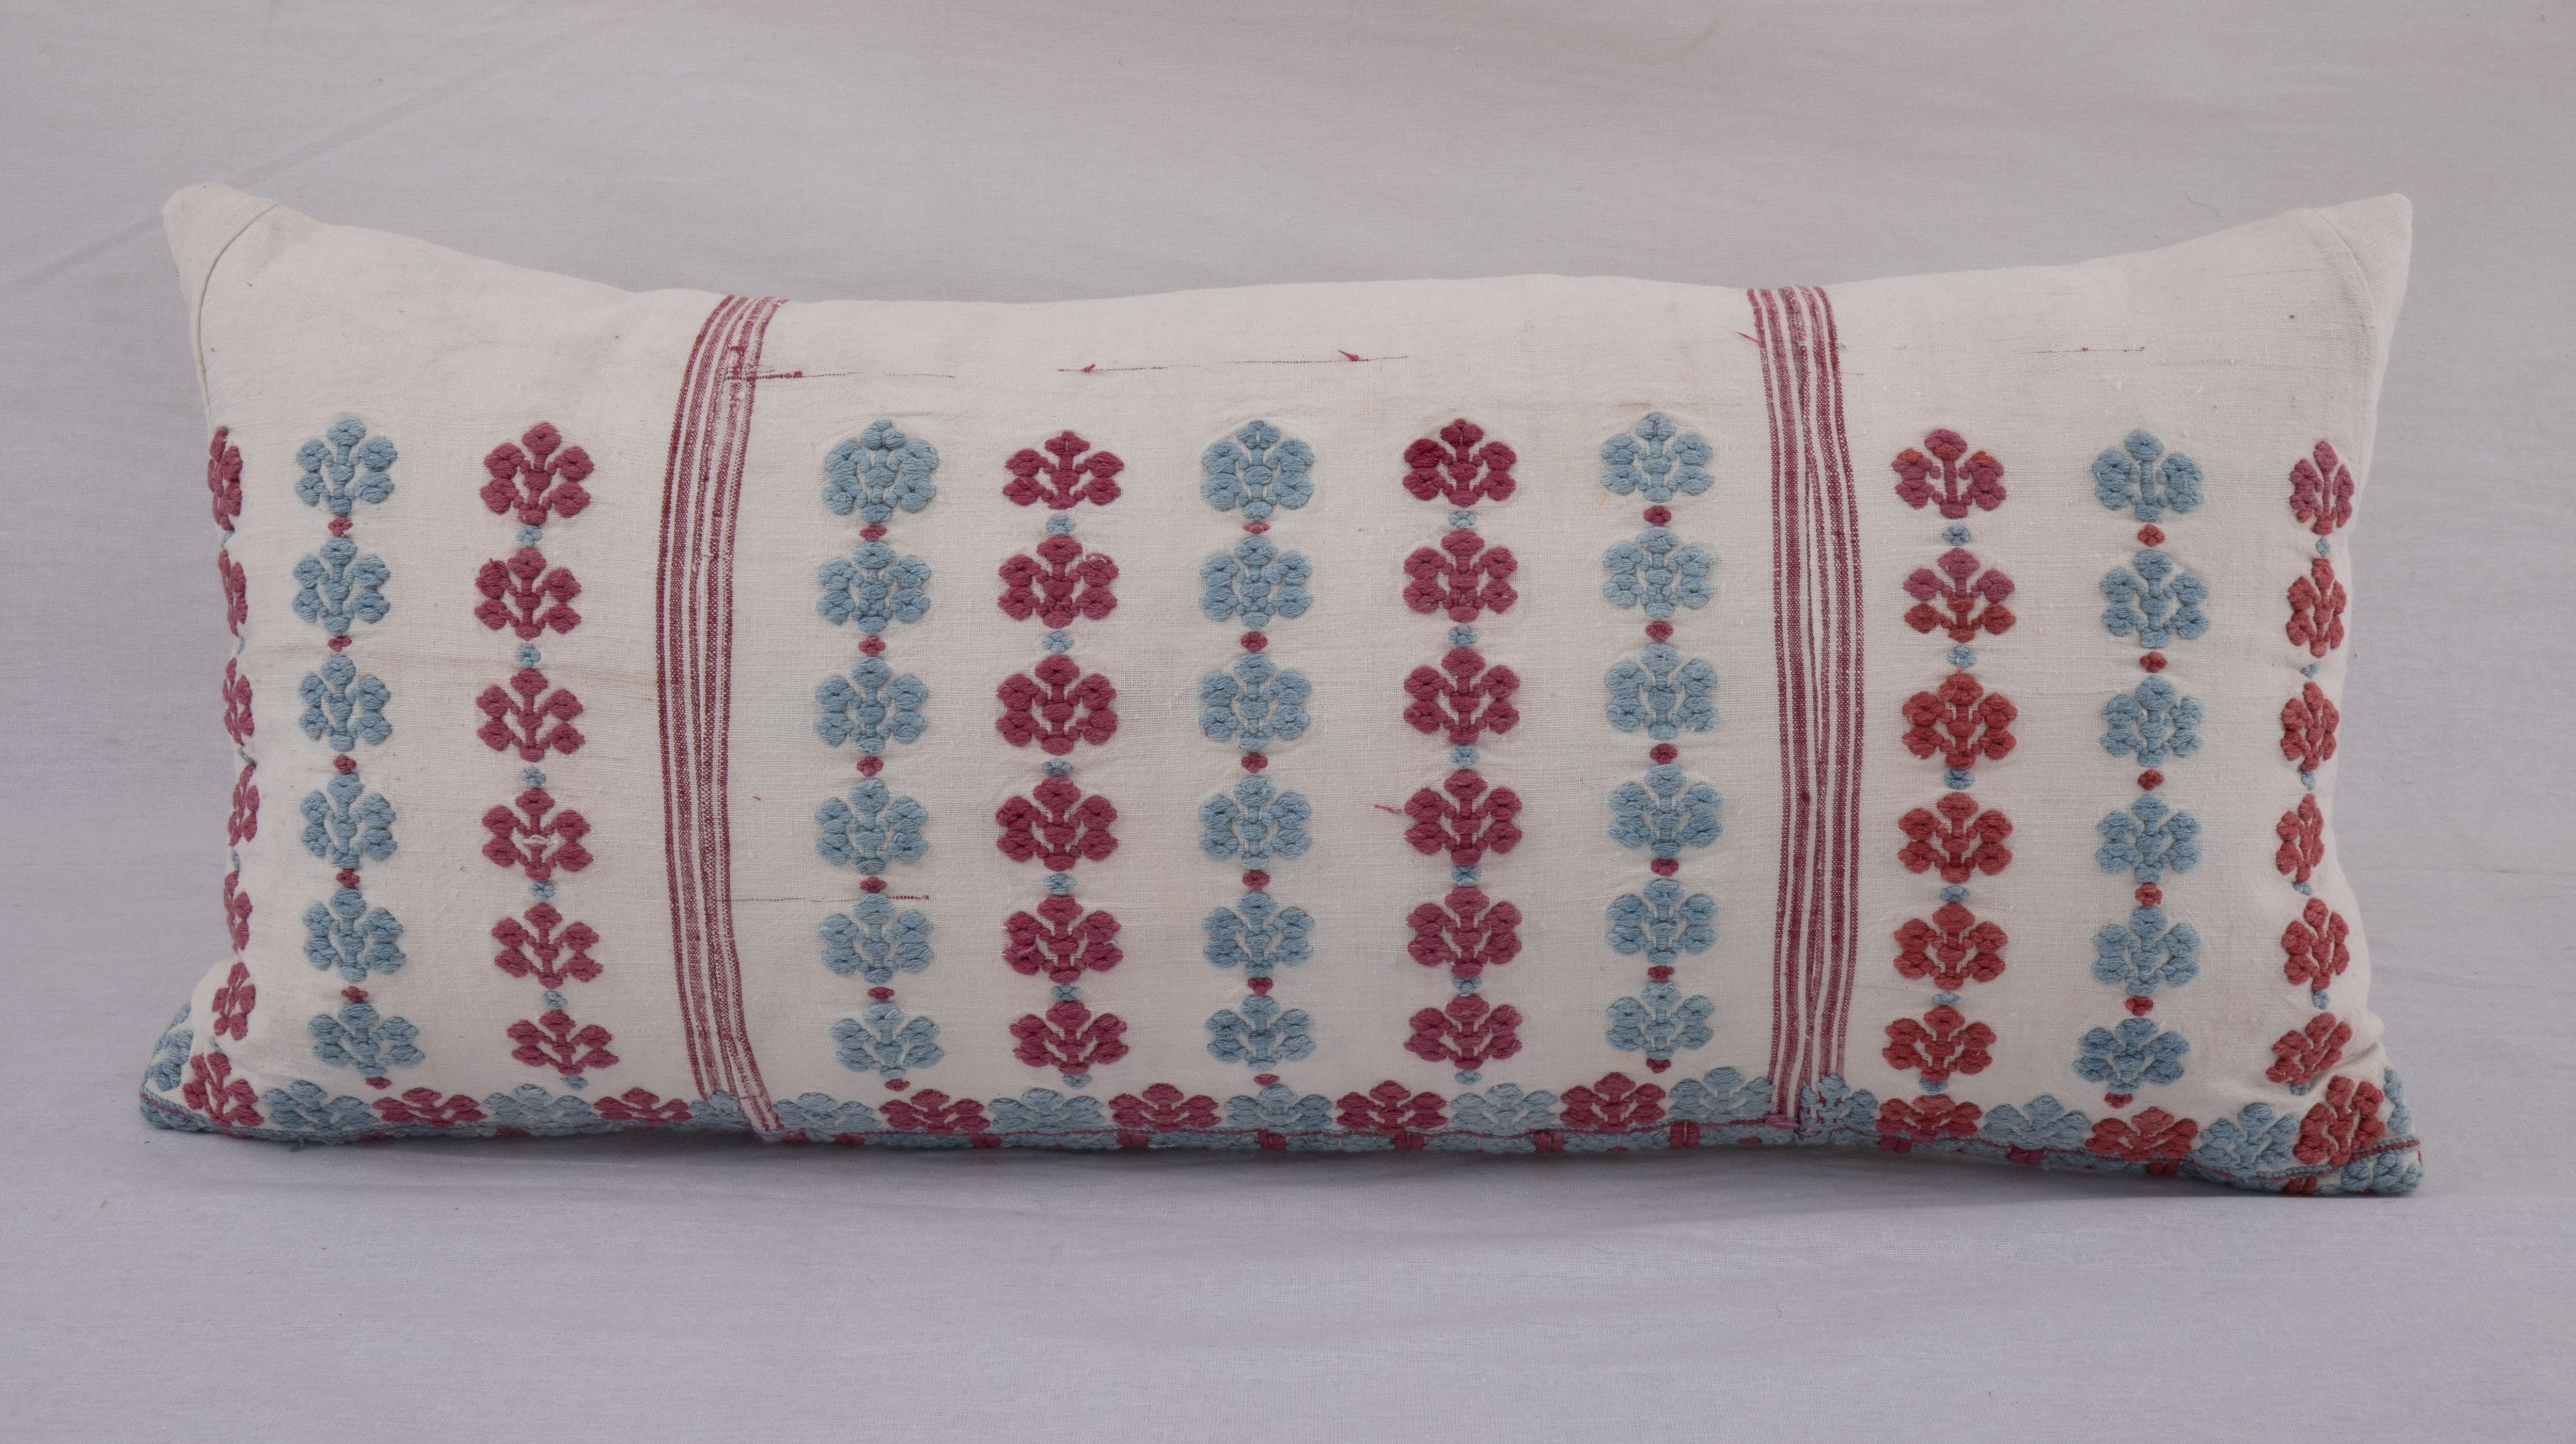 The pillow case has been fashioned from a Western Anatolian Cotton embroidered dress skirt.
It does not come with an insert but a bag made from cotton fabric to accommodate insert materials.
Linen in the back.
Zipper closure.
Dry Cleaning